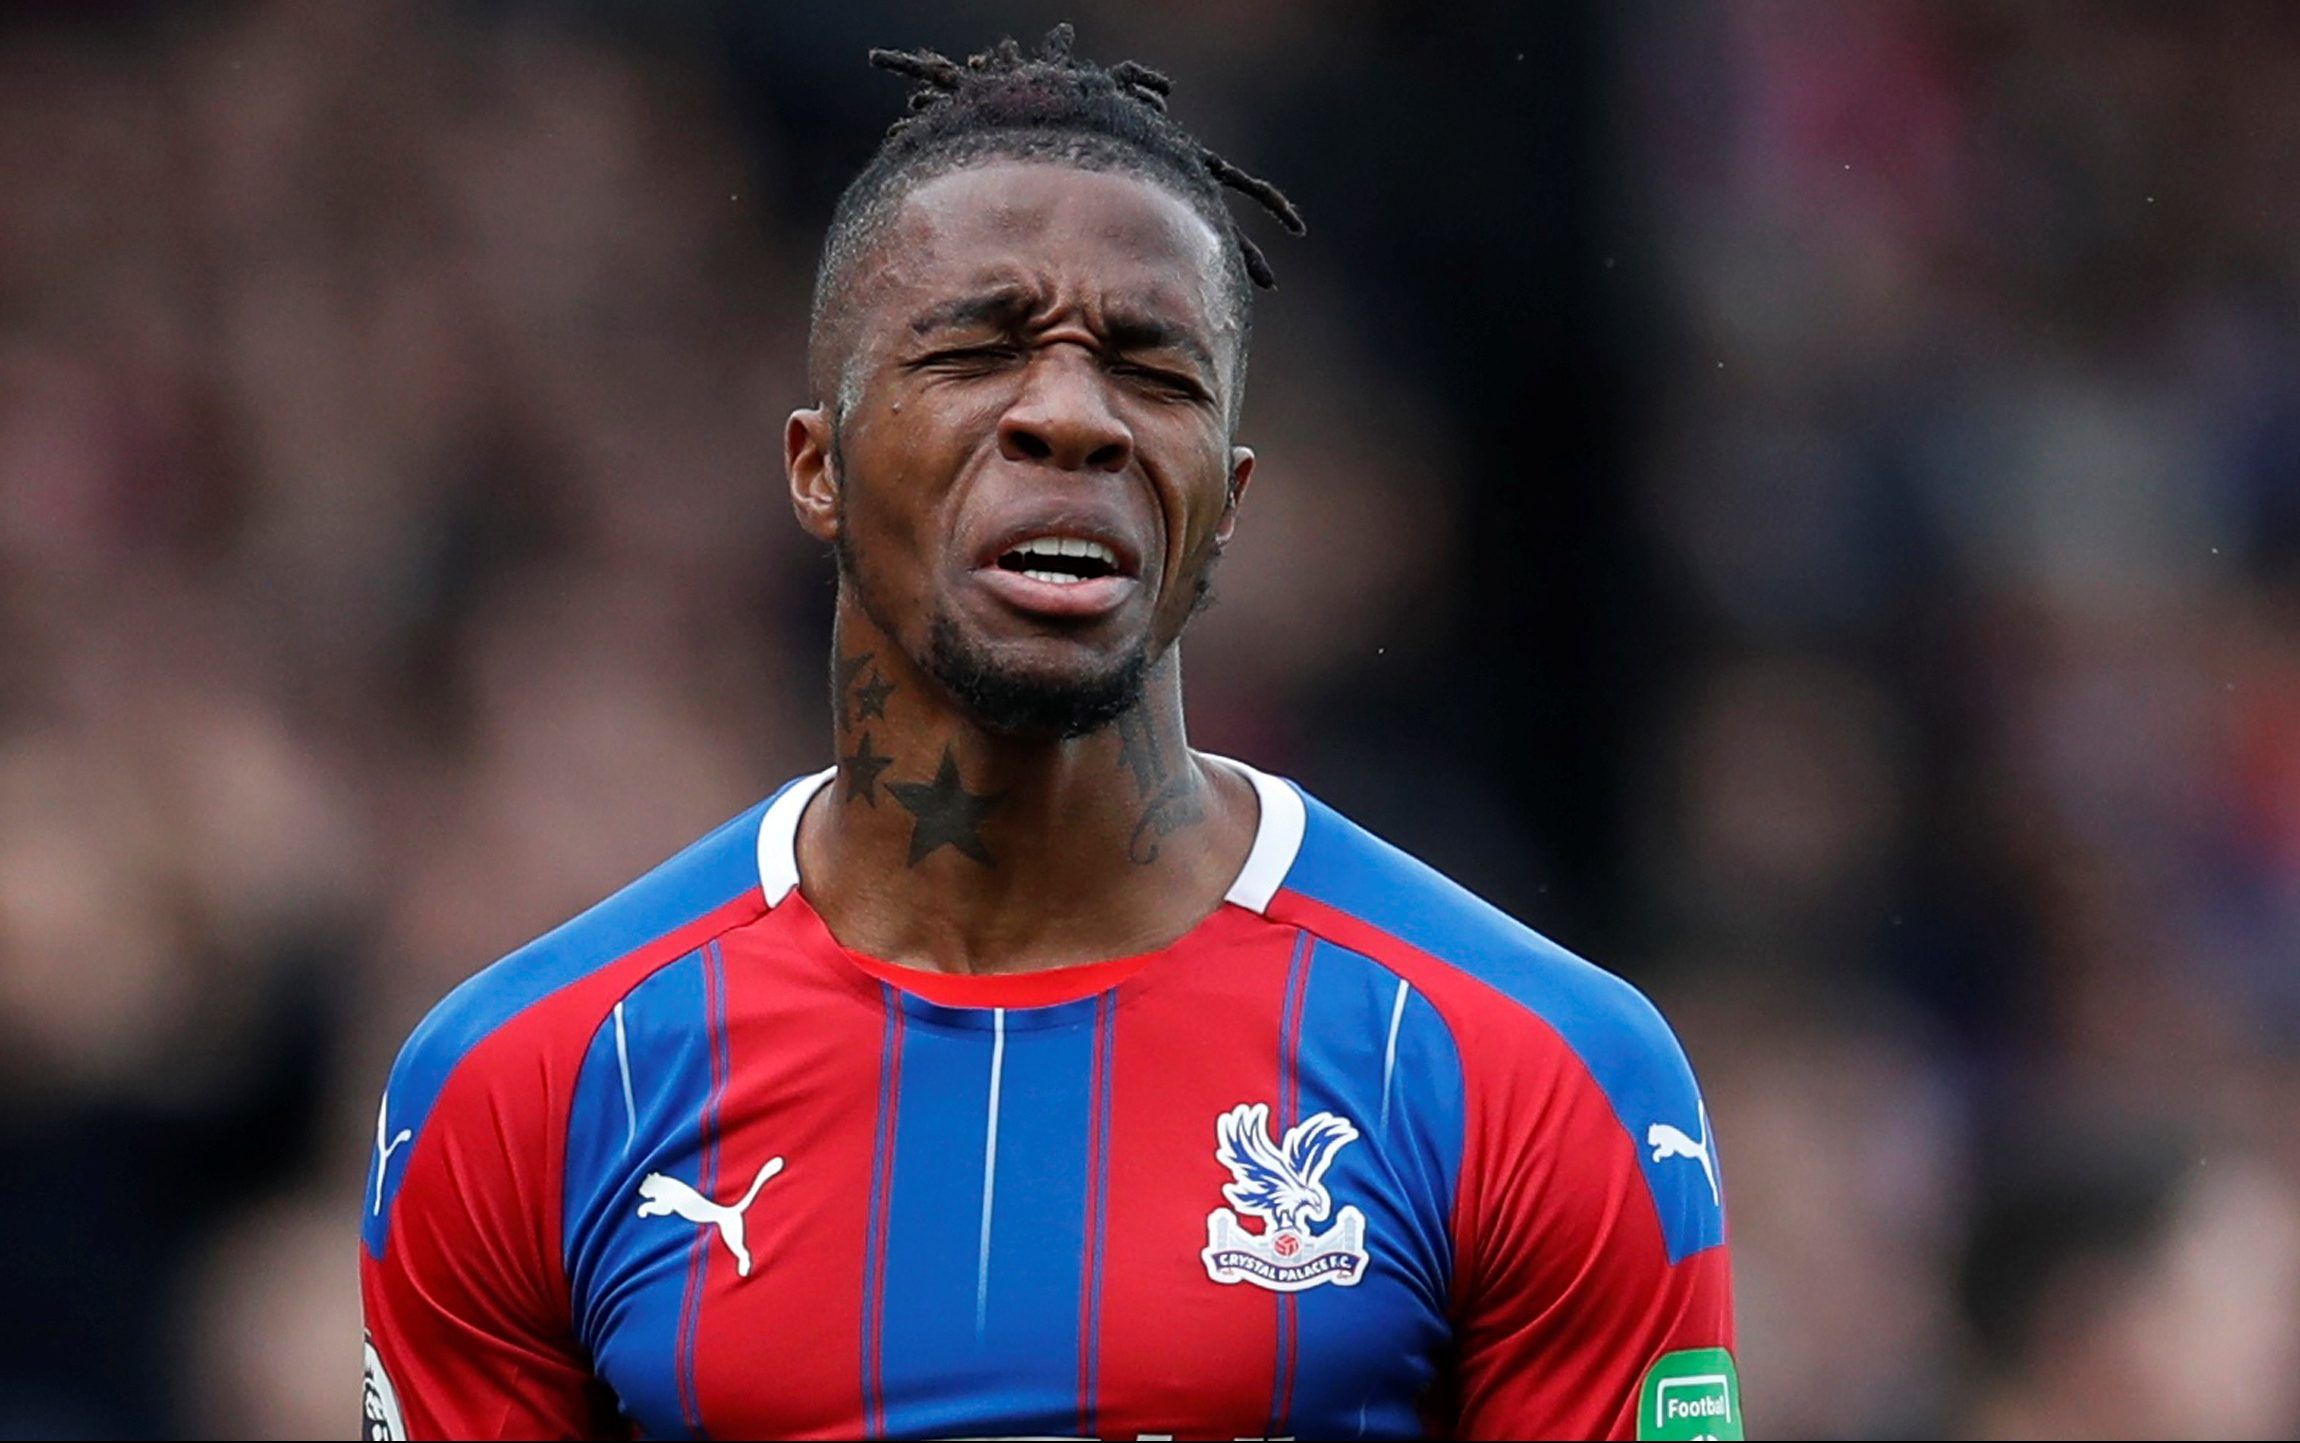 Soccer Football - Premier League - Crystal Palace v Arsenal - Selhurst Park, London, Britain - January 11, 2020  Crystal Palace's Wilfried Zaha reacts REUTERS/David Klein  EDITORIAL USE ONLY. No use with unauthorized audio, video, data, fixture lists, club/league logos or 